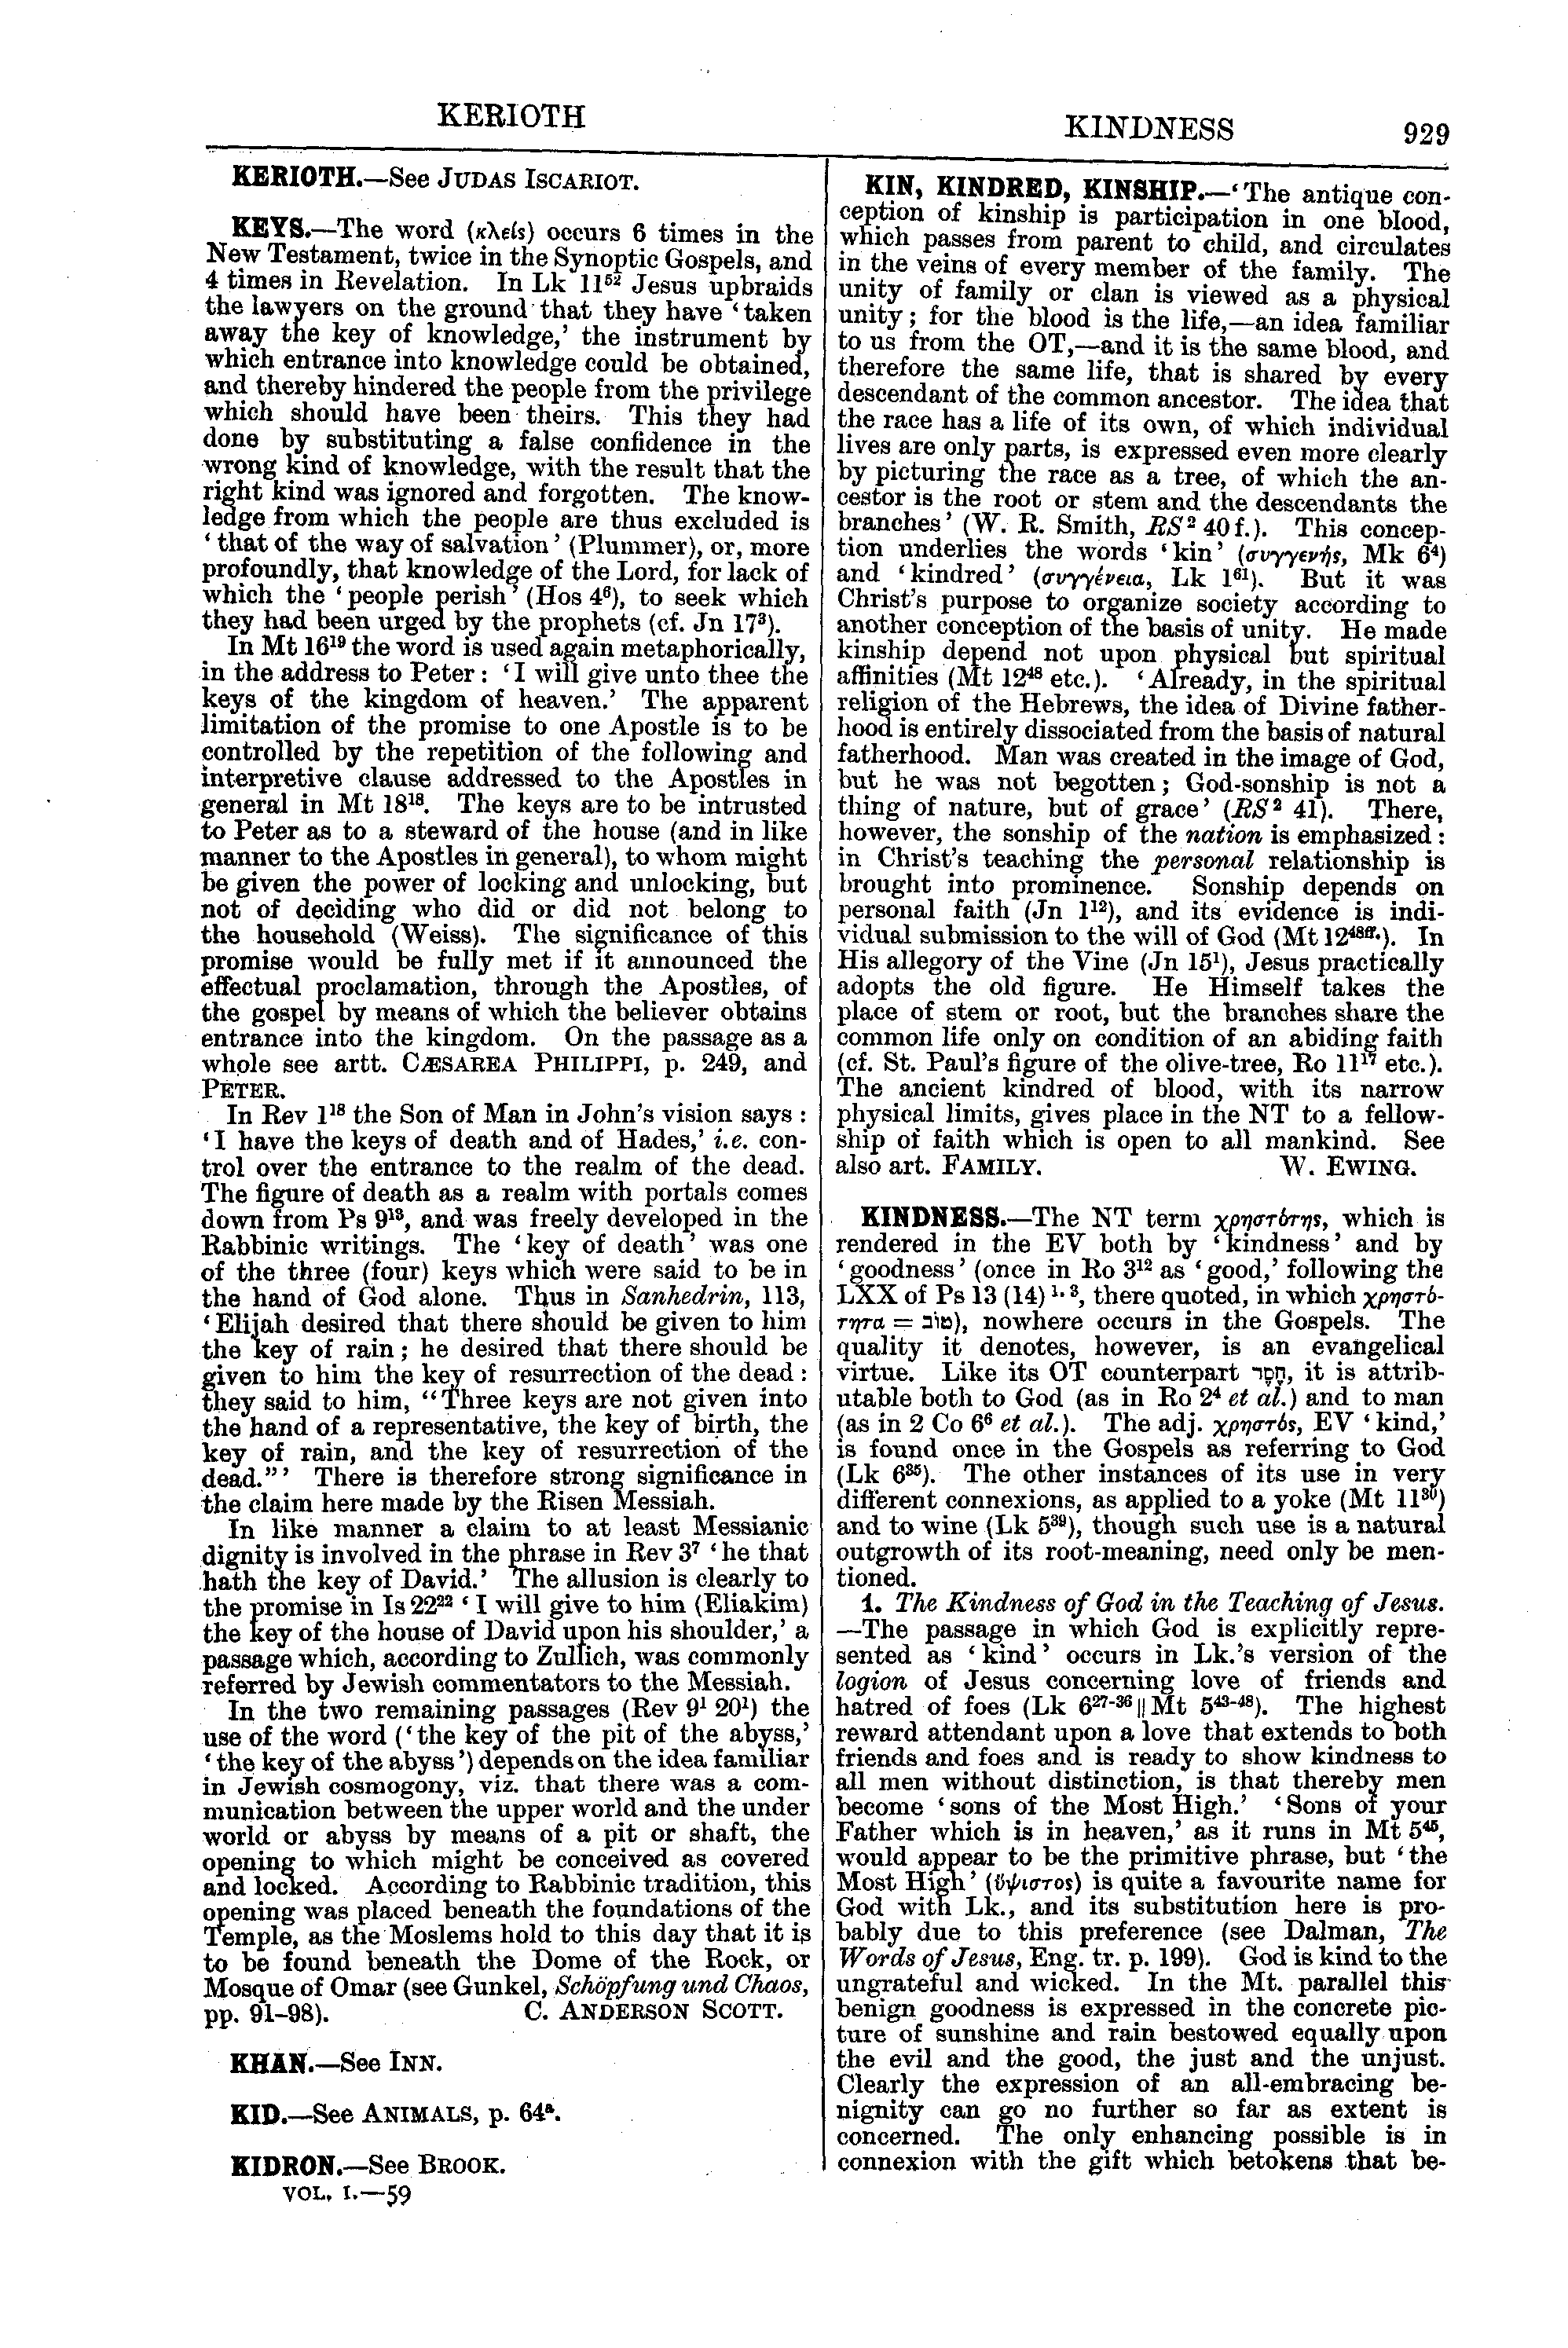 Image of page 929